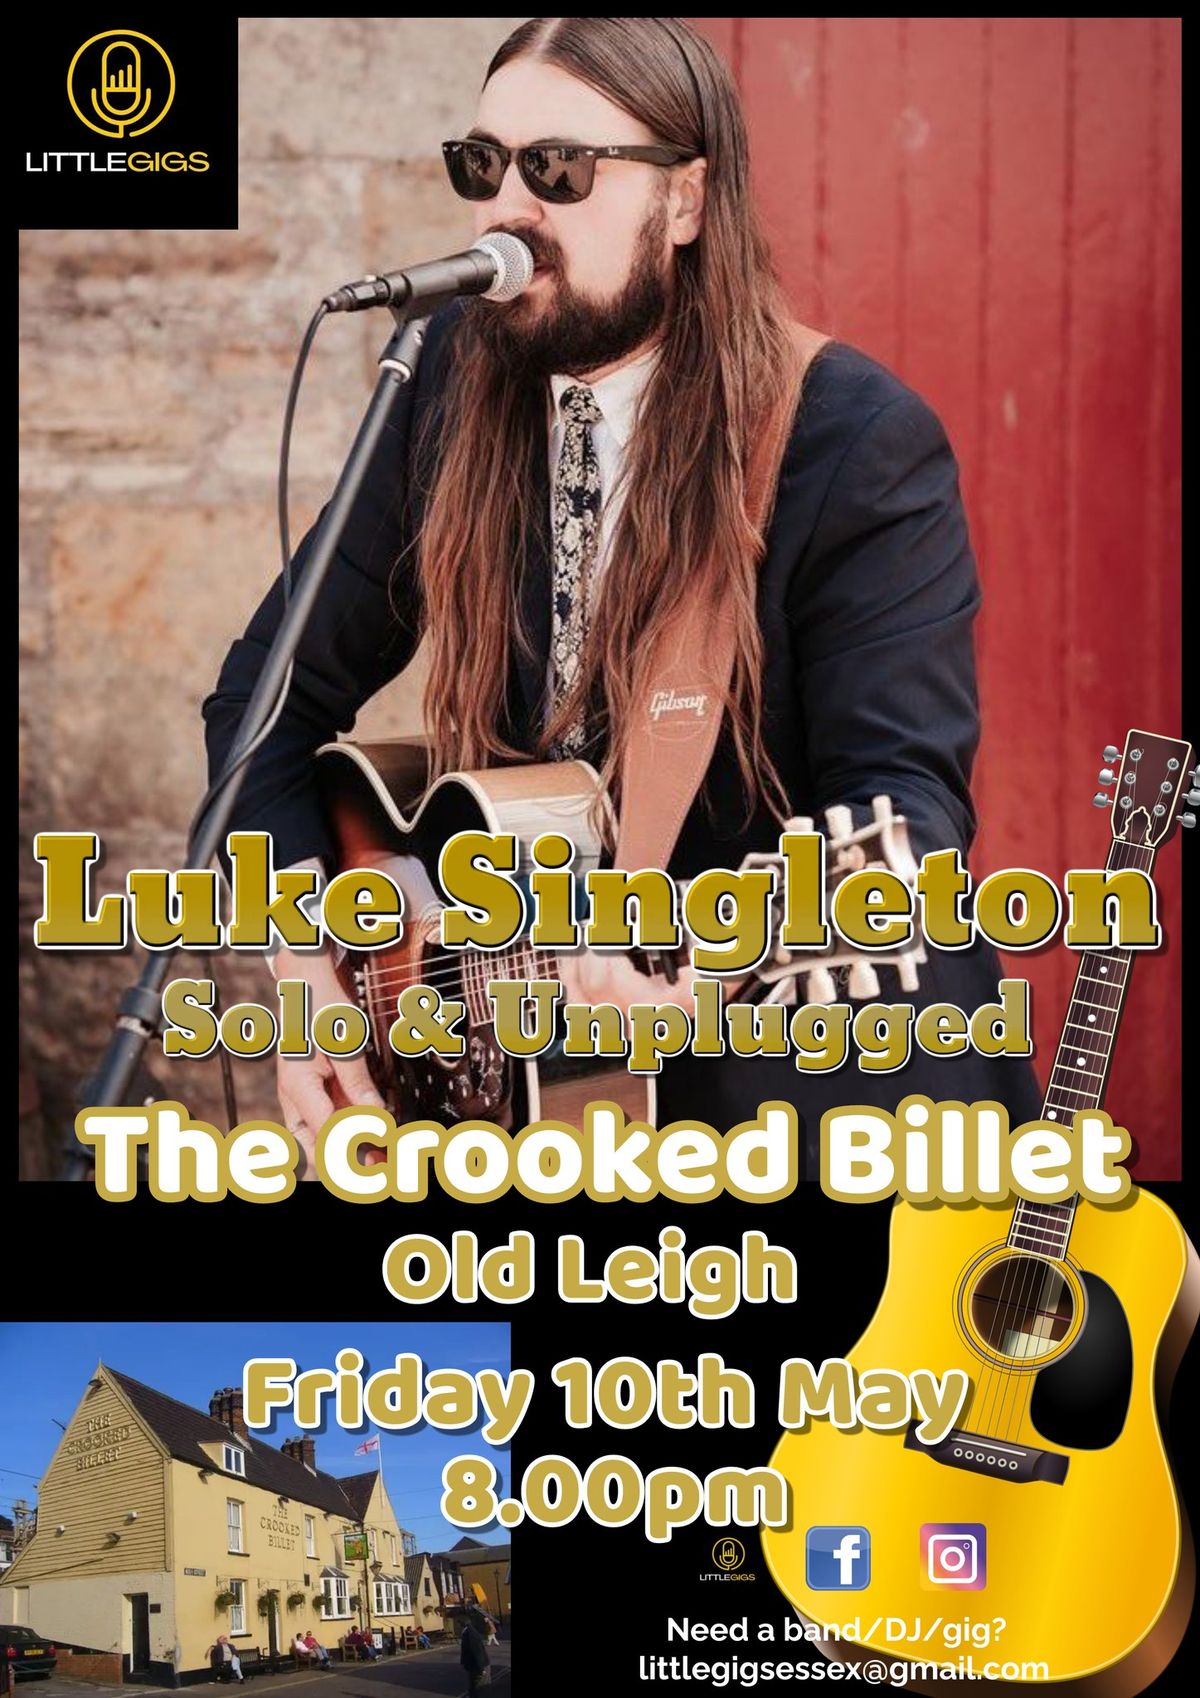 Luke Singleton - Solo & Unplugged at The Crooked Billet, Old Leigh \ud83c\udfa4